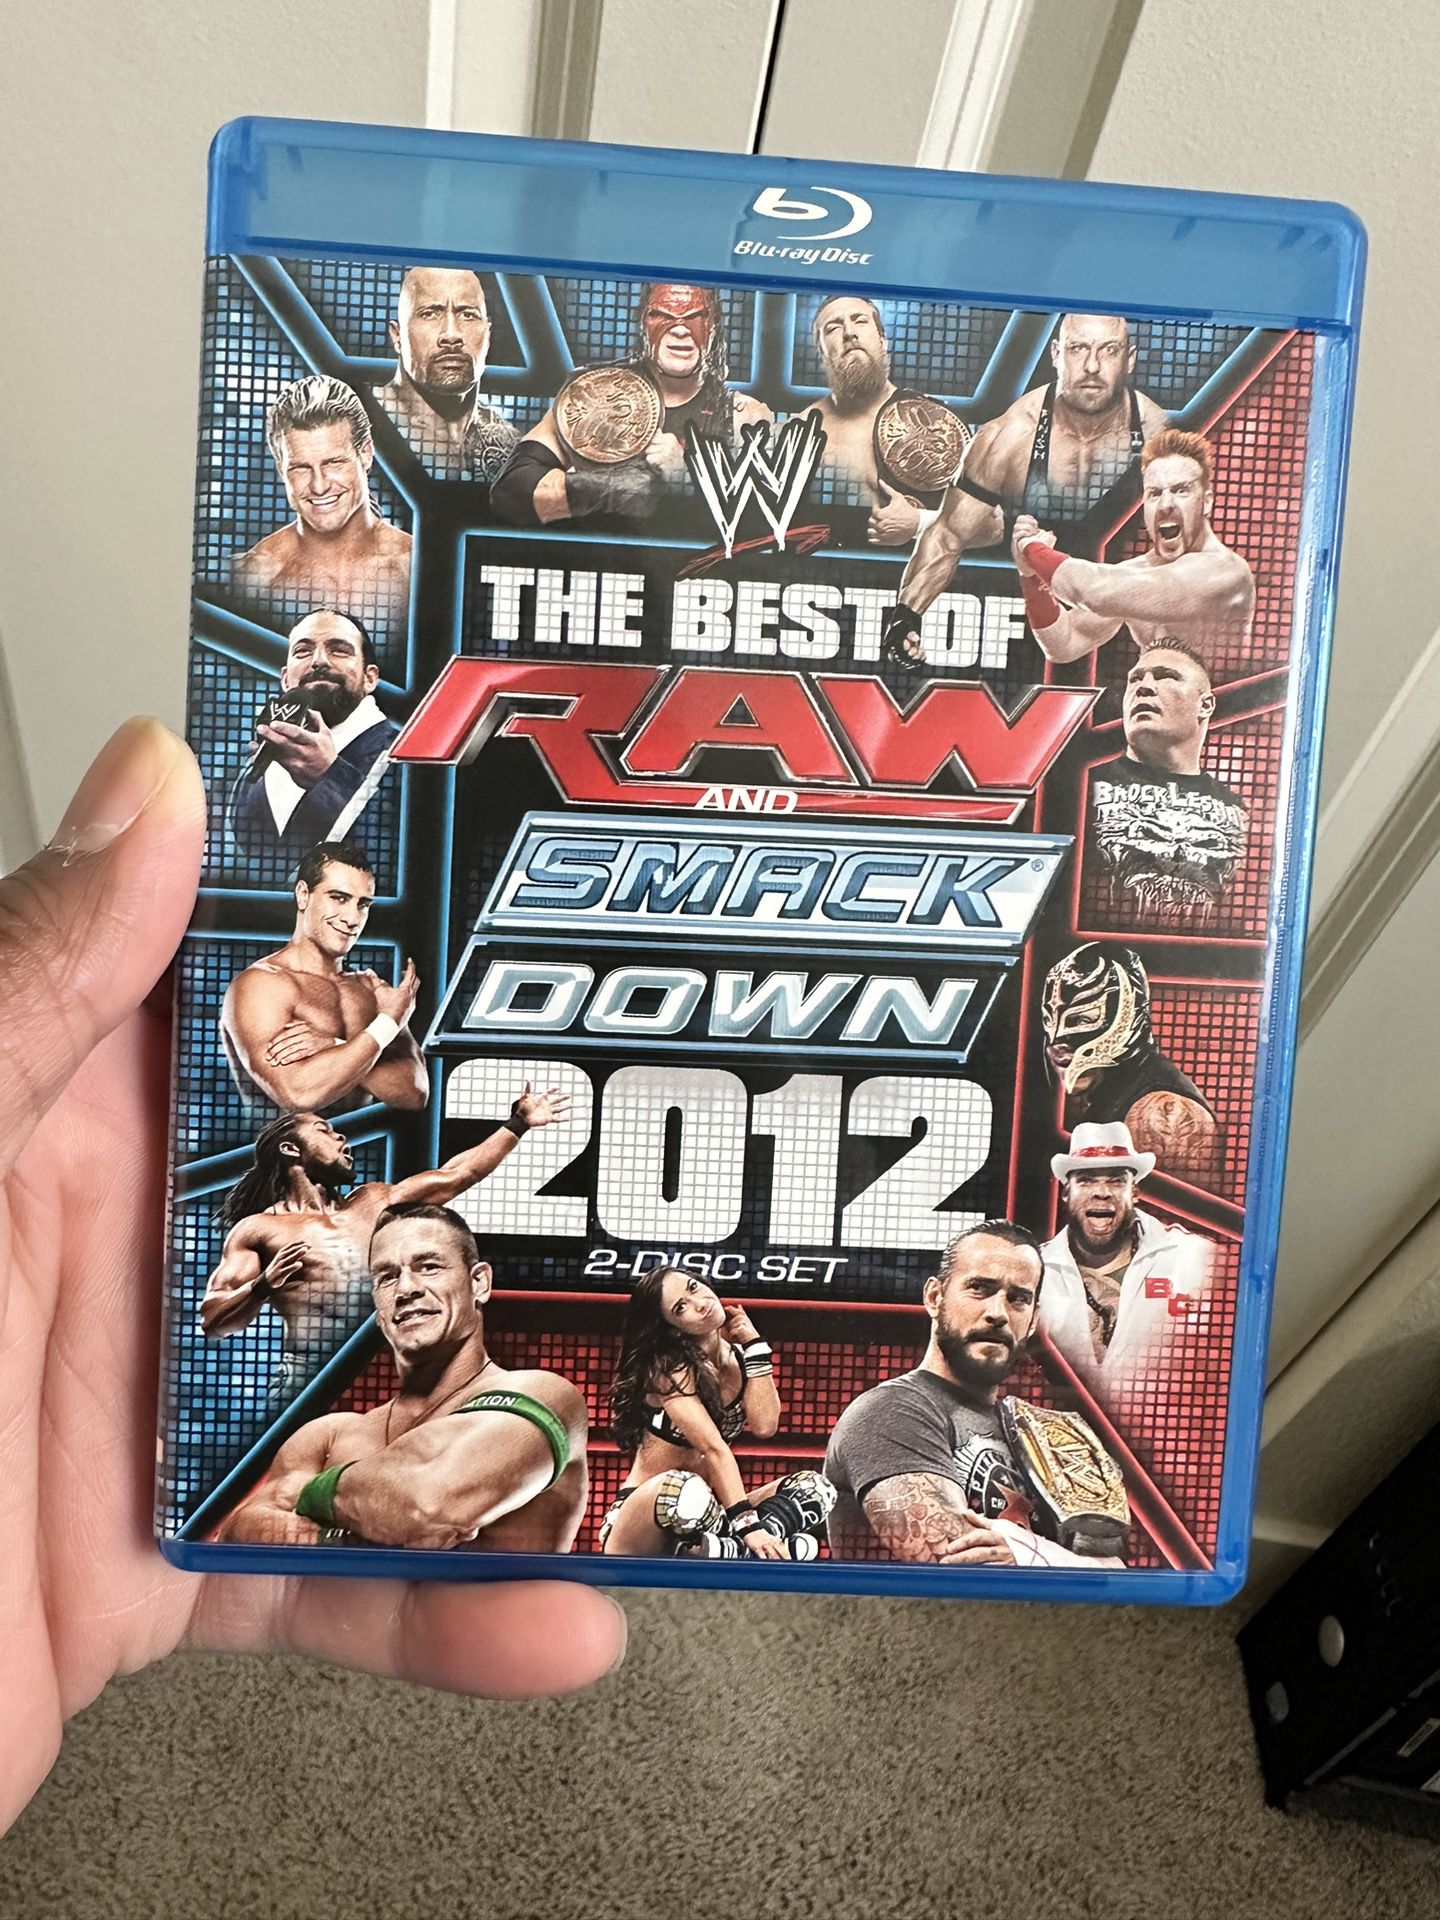 The Best Of WWE Raw and Smack Down 2012 